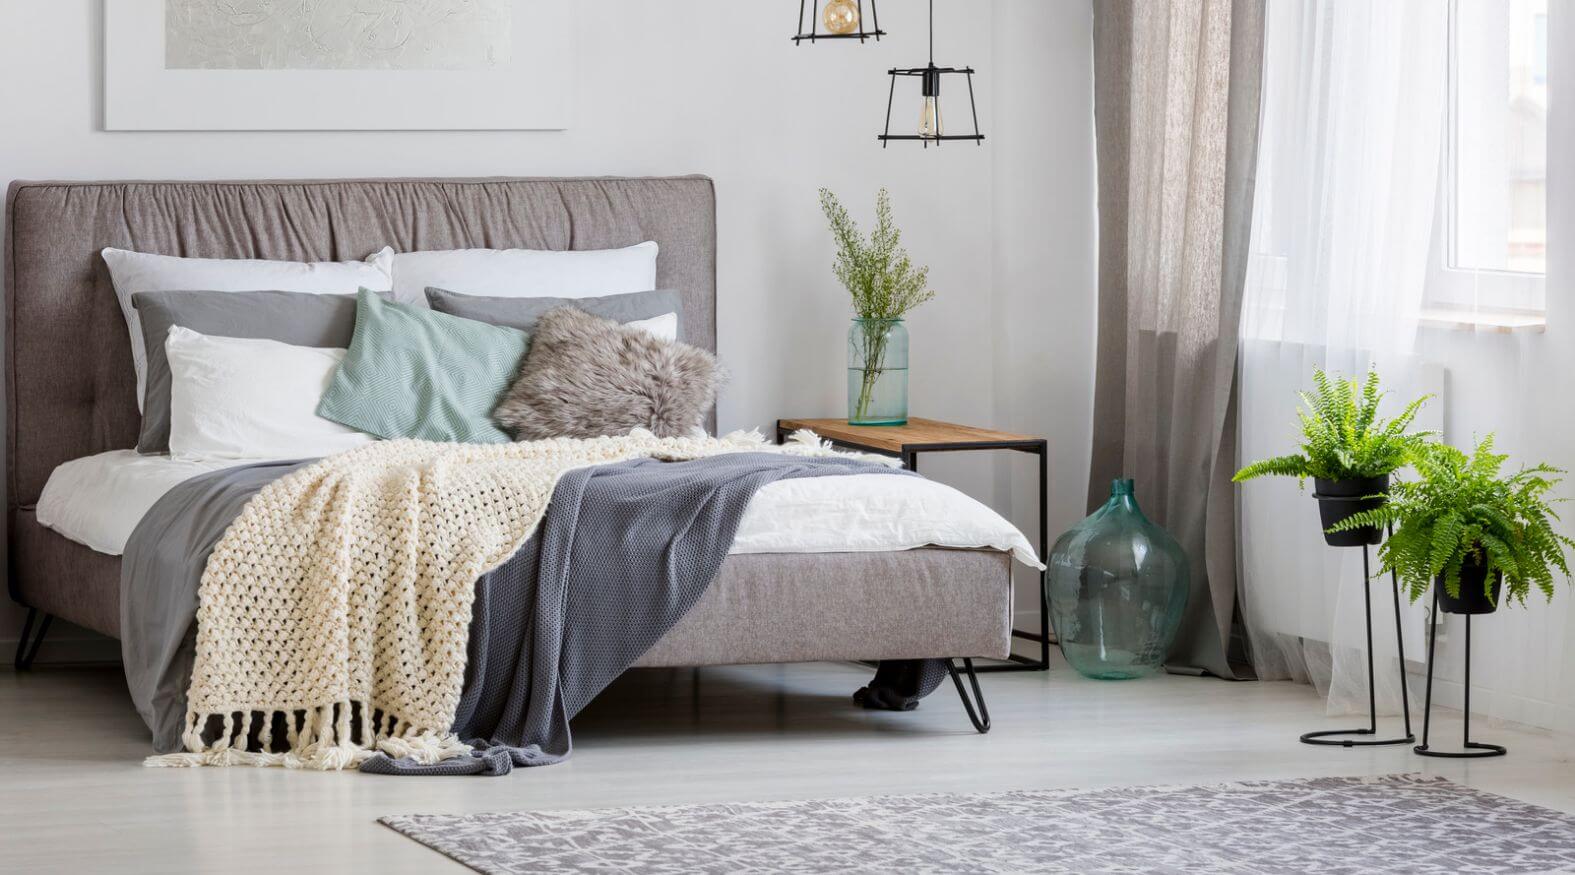 Gray bedroom filled with greenery